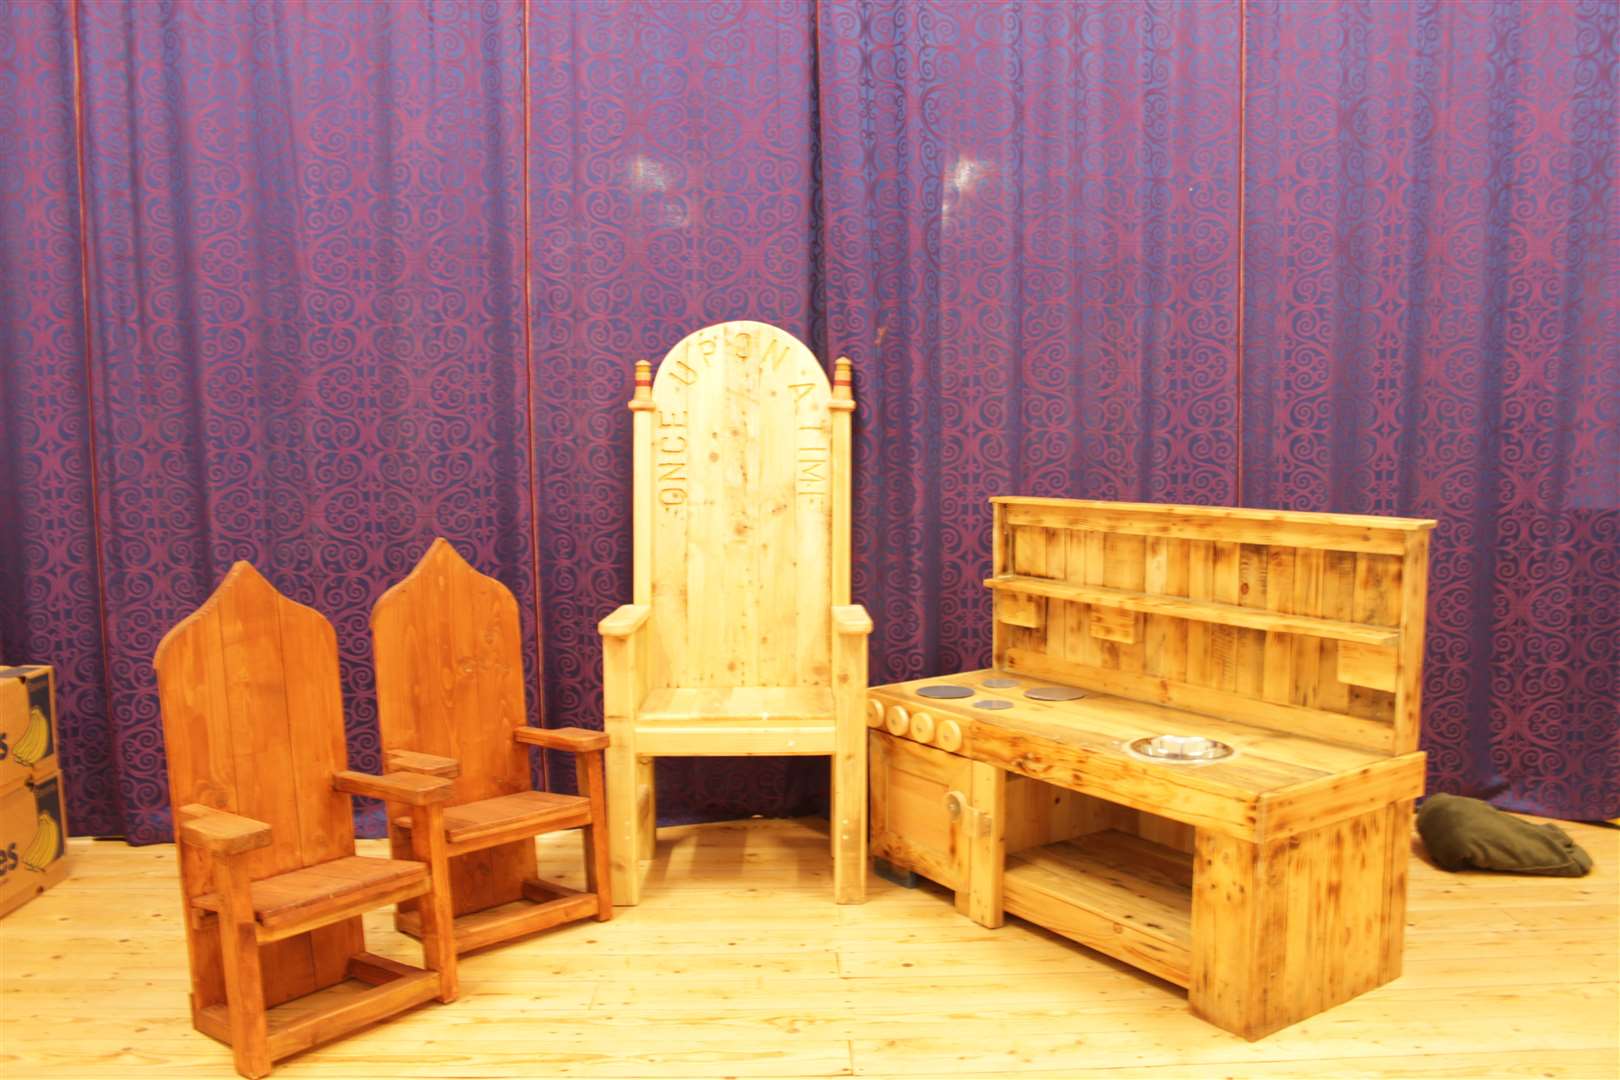 The storytelling chairs and mud kitchen presented to Findochty Primary School and nursery. Picture: Allan Gargan